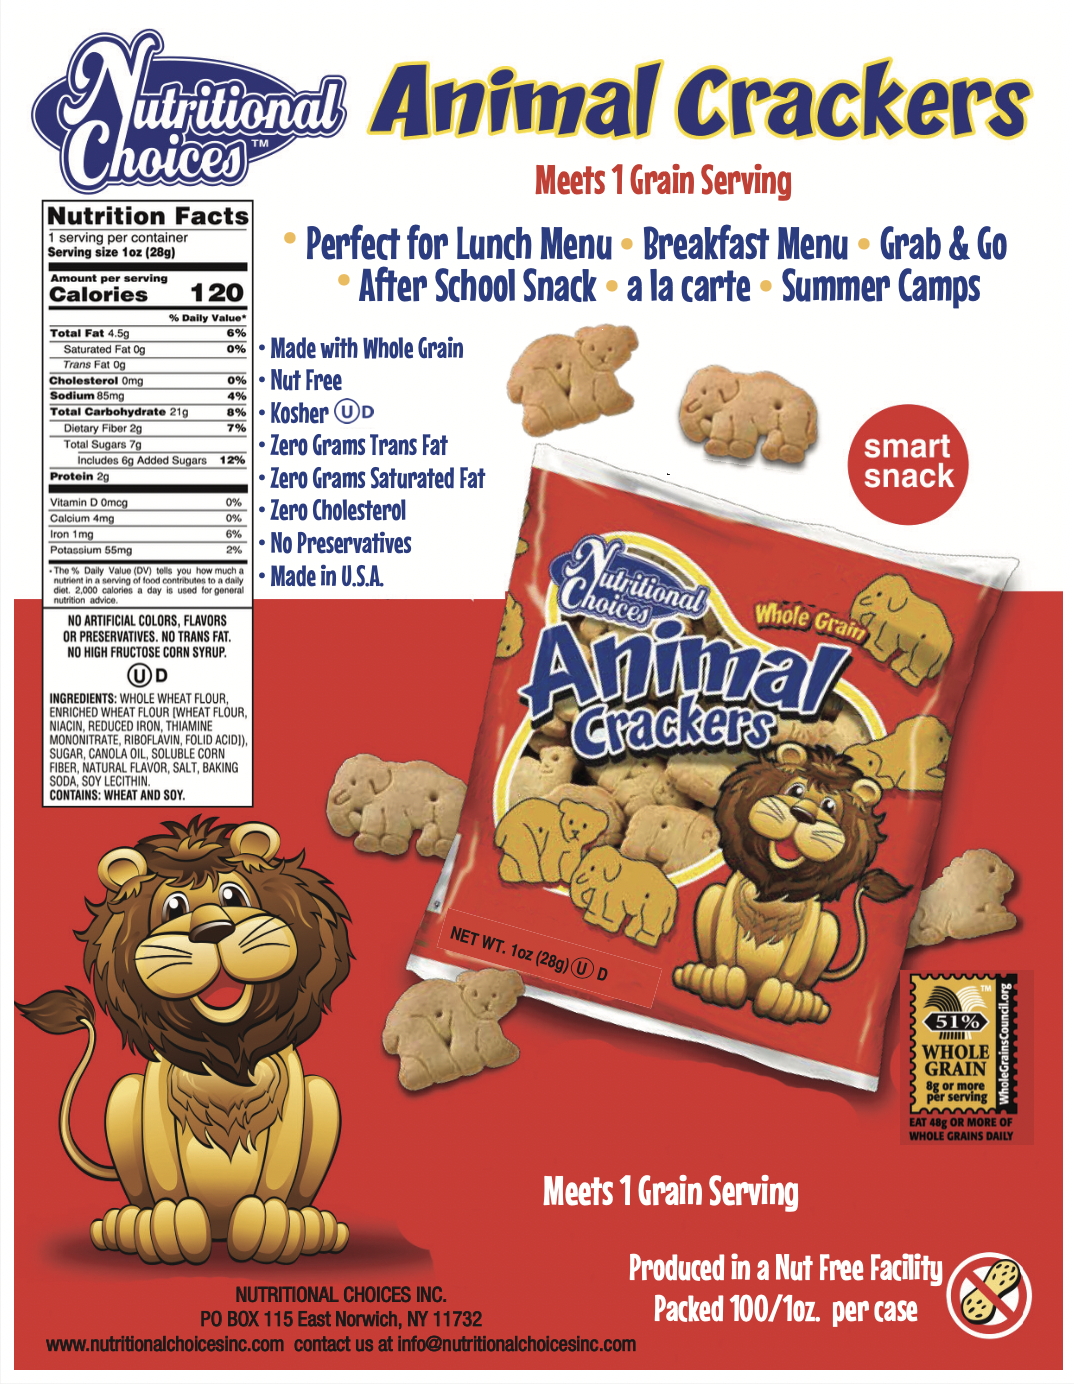 Informational packet on Nutritional Choices's animal crackers